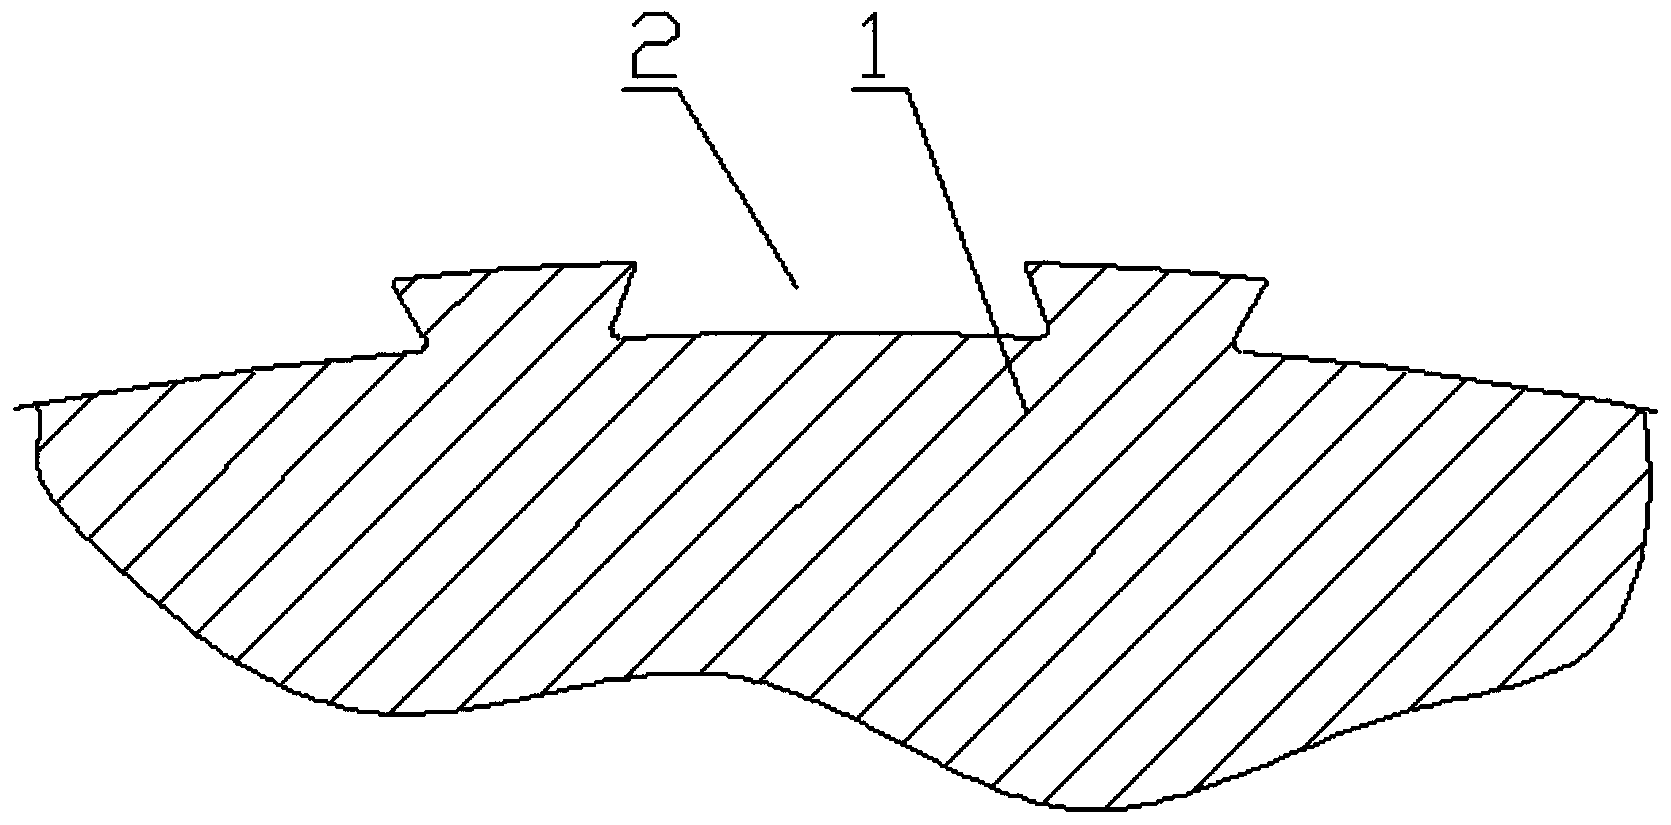 Grinding wheel structure and manufacturing method